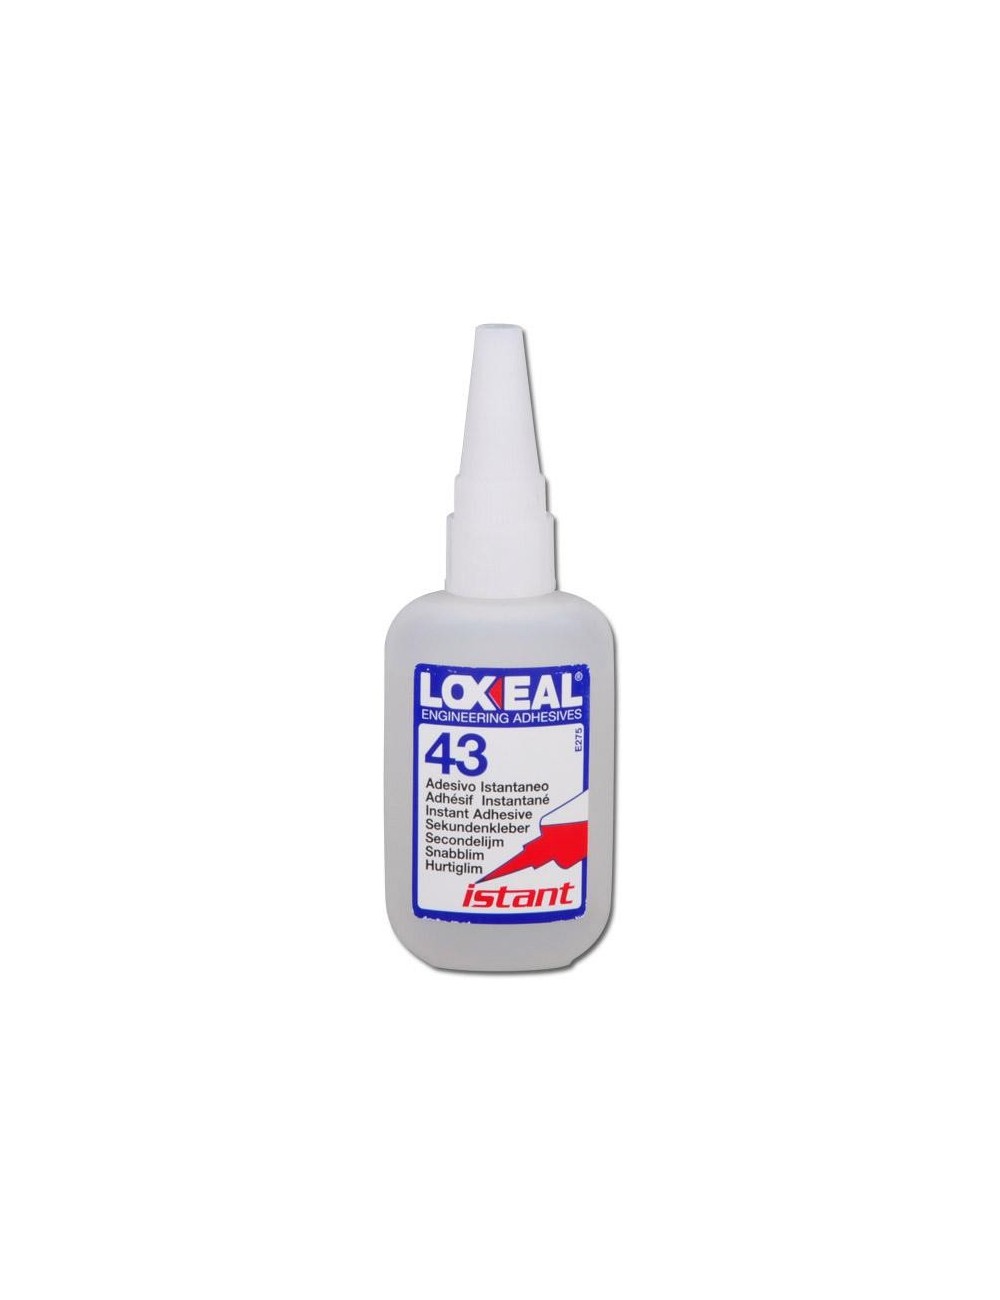 LOXEAL 43 ISTANT Colle uni-rapide universal, 20gr.